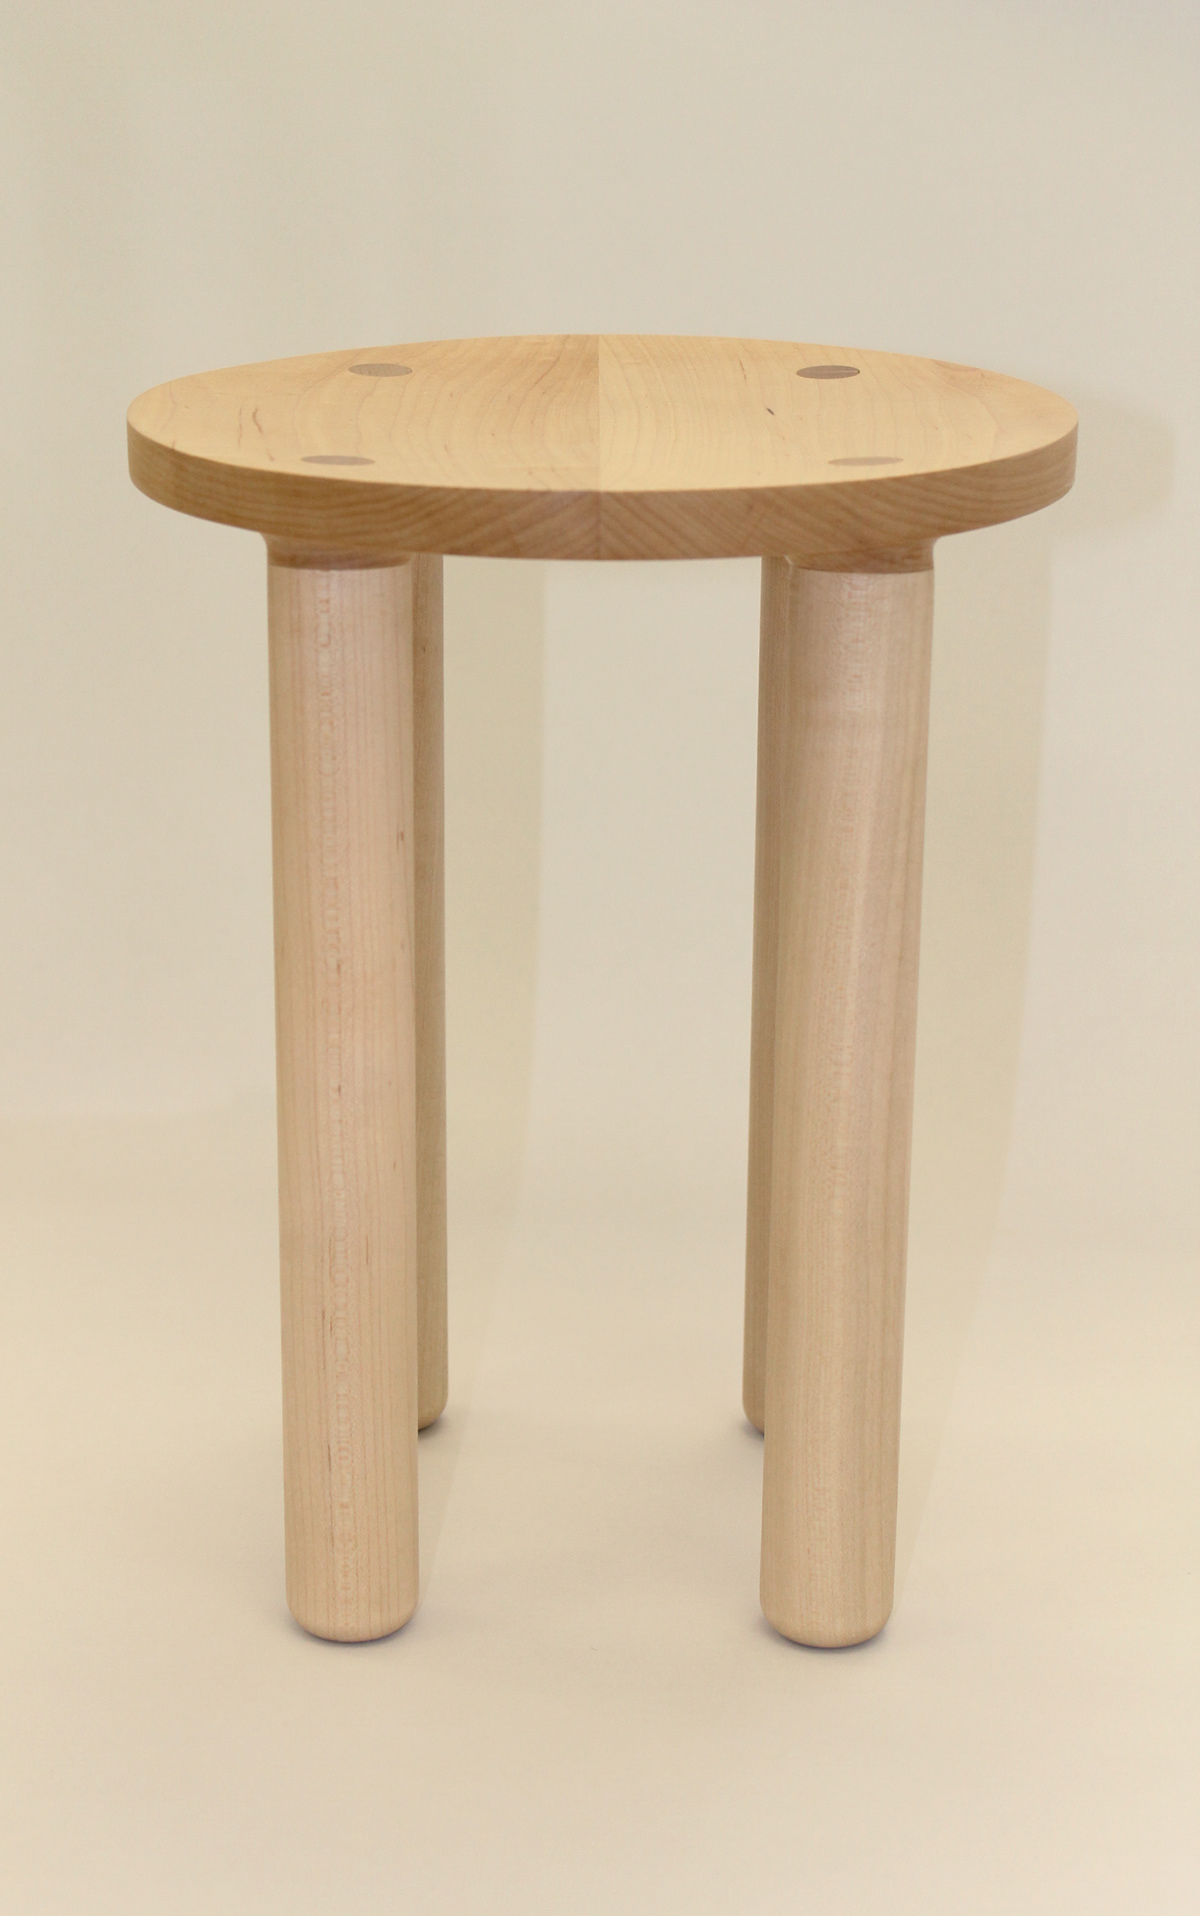 muji Super Normal stool cnc risd Solidworks CNC lathe brand idenity brand research 3D Drawing small stool